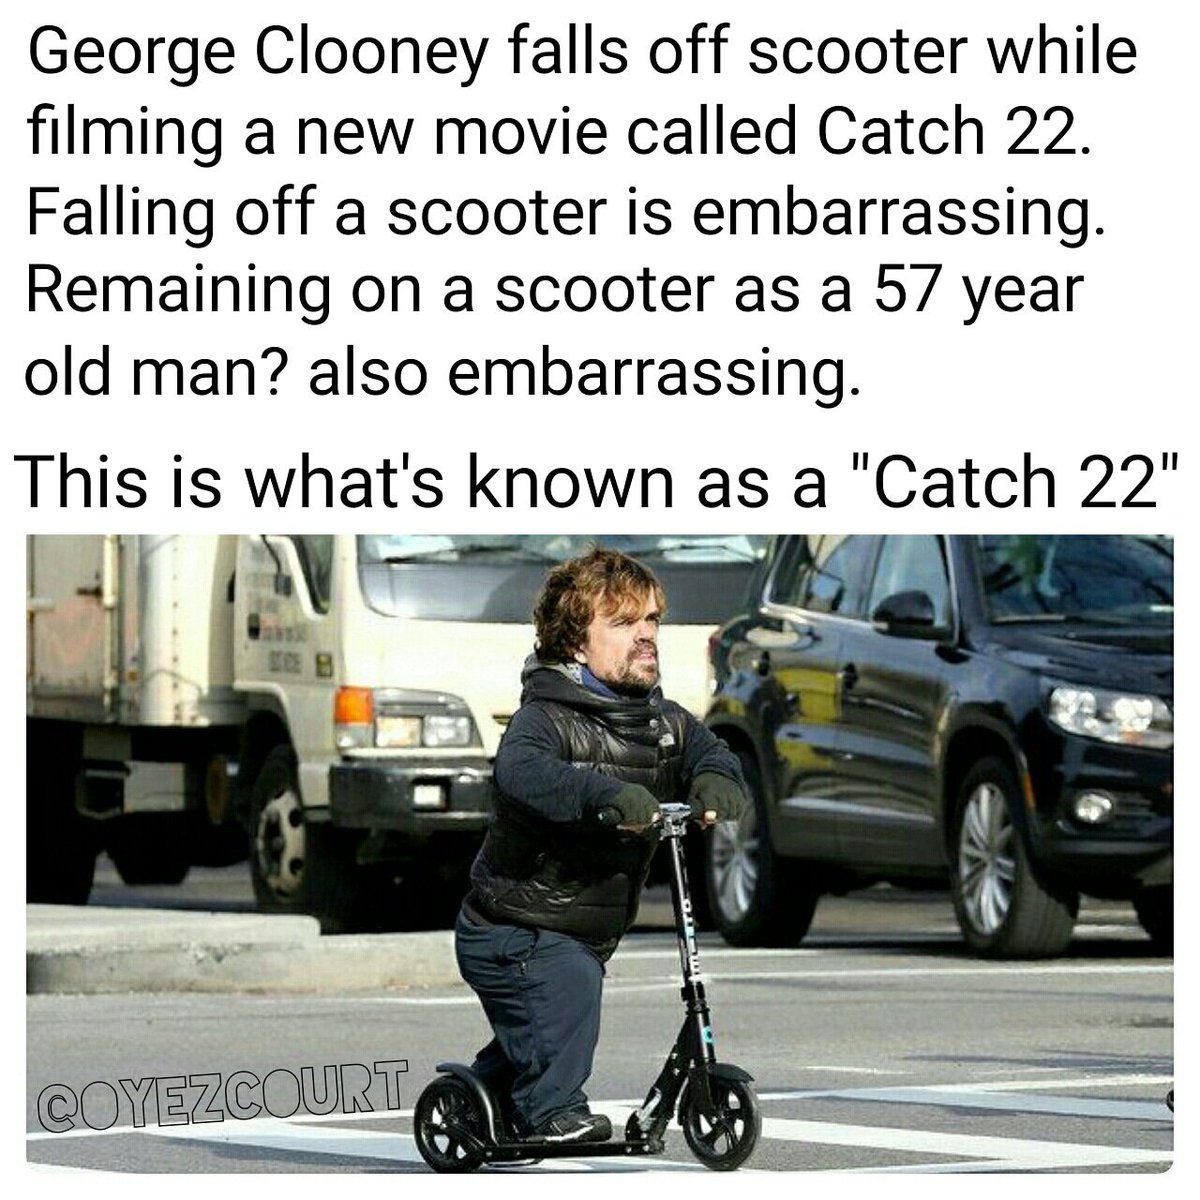 silke lyse Ruckus Hedi on Twitter: "#DankMemes #Jokes #Funny #Comedy #GeorgeClooney #Scooter  #Catch22 #Movies #News #Accident #Italy 🤕 https://t.co/w5Jqv5Lmdt" /  Twitter